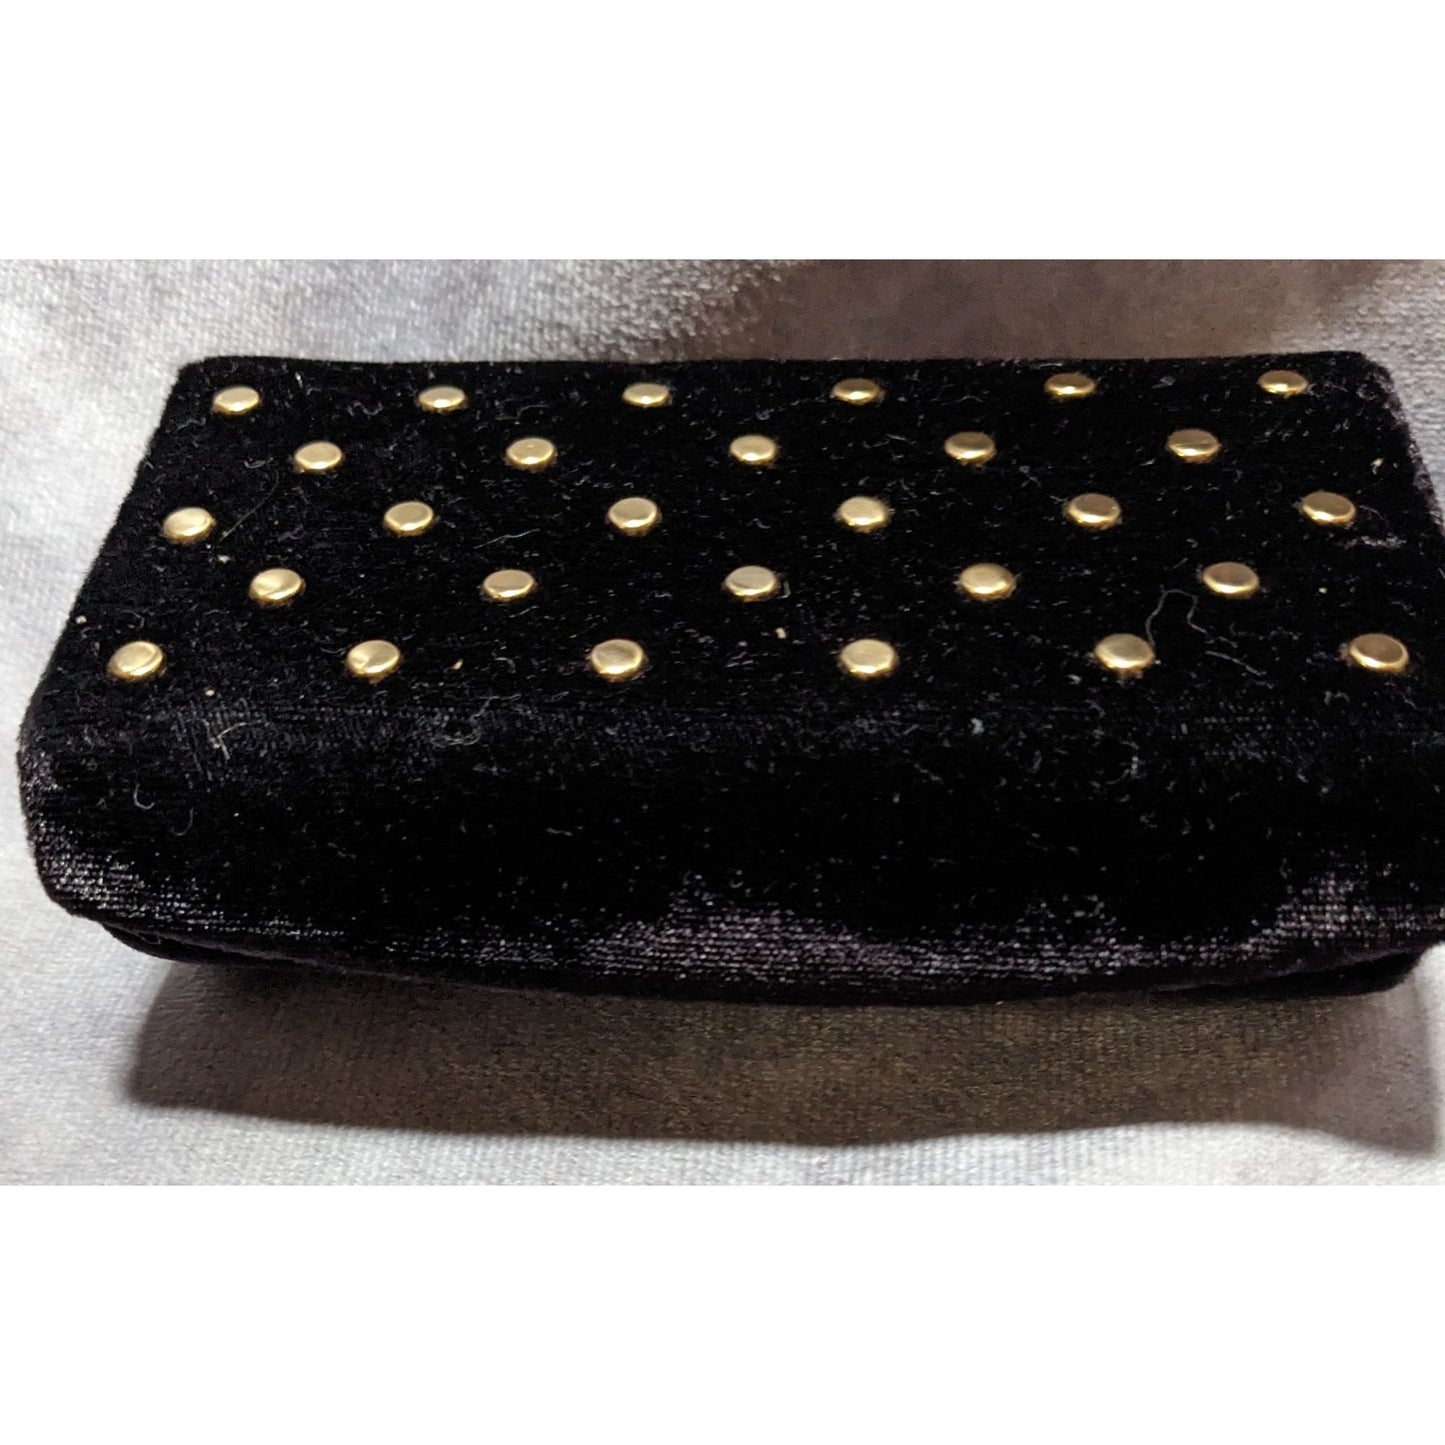 Lancome Black Studded Cosmetic Case